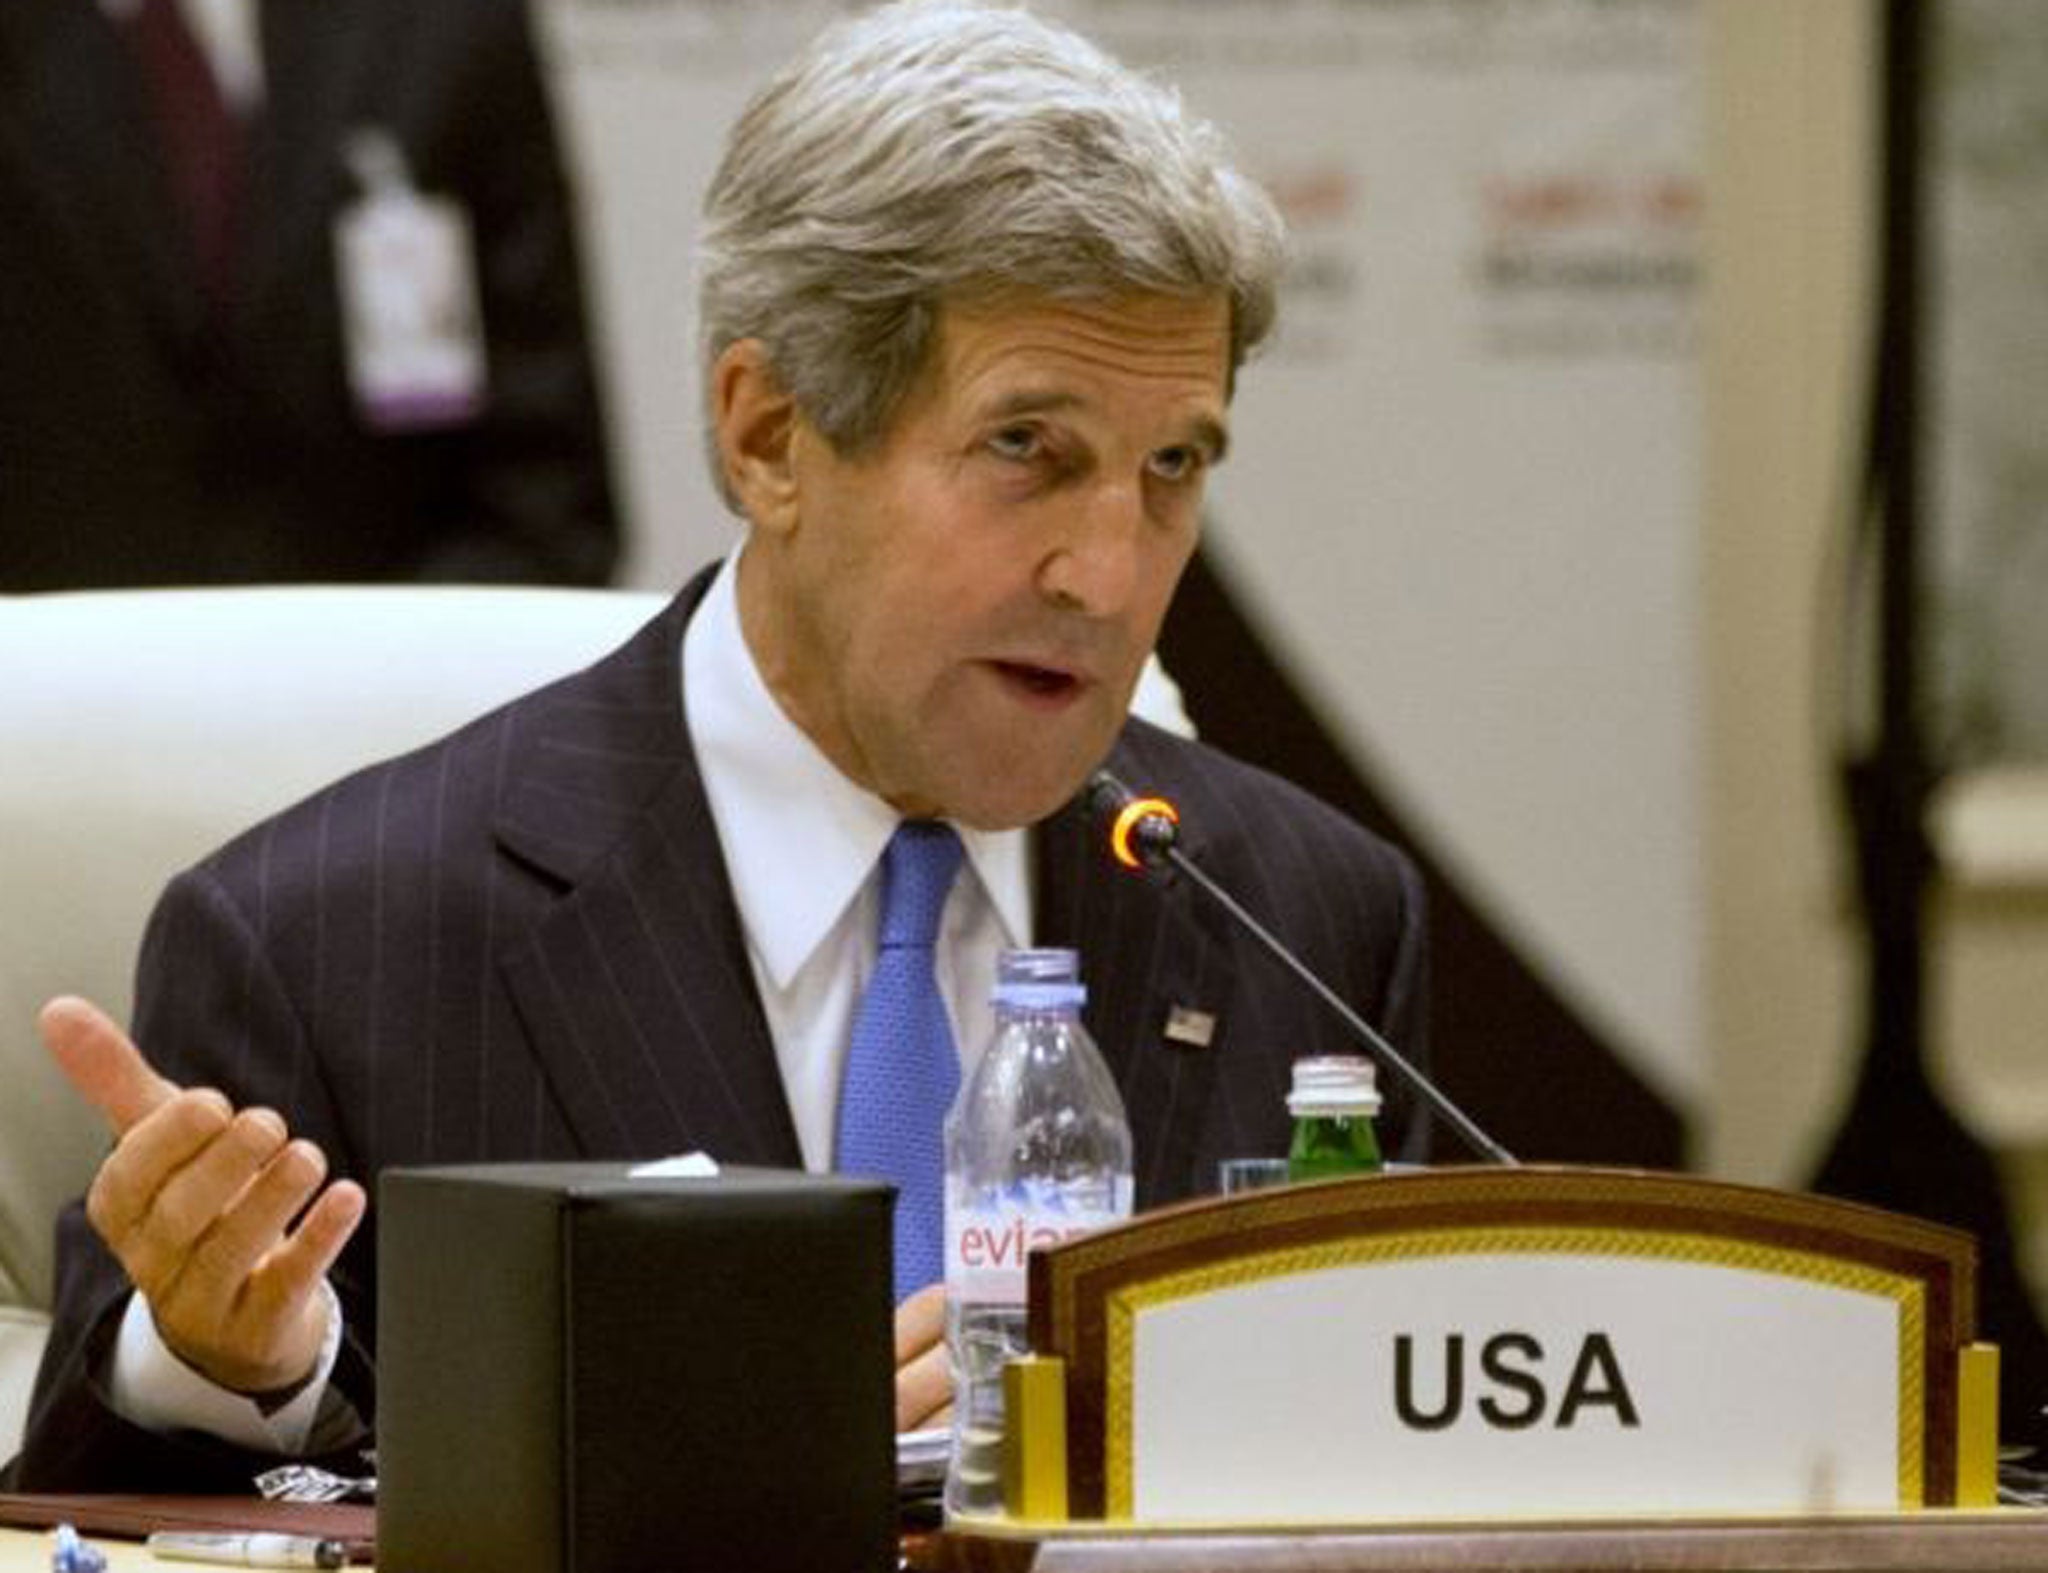 John Kerry was among foreign ministers meeting in Doha